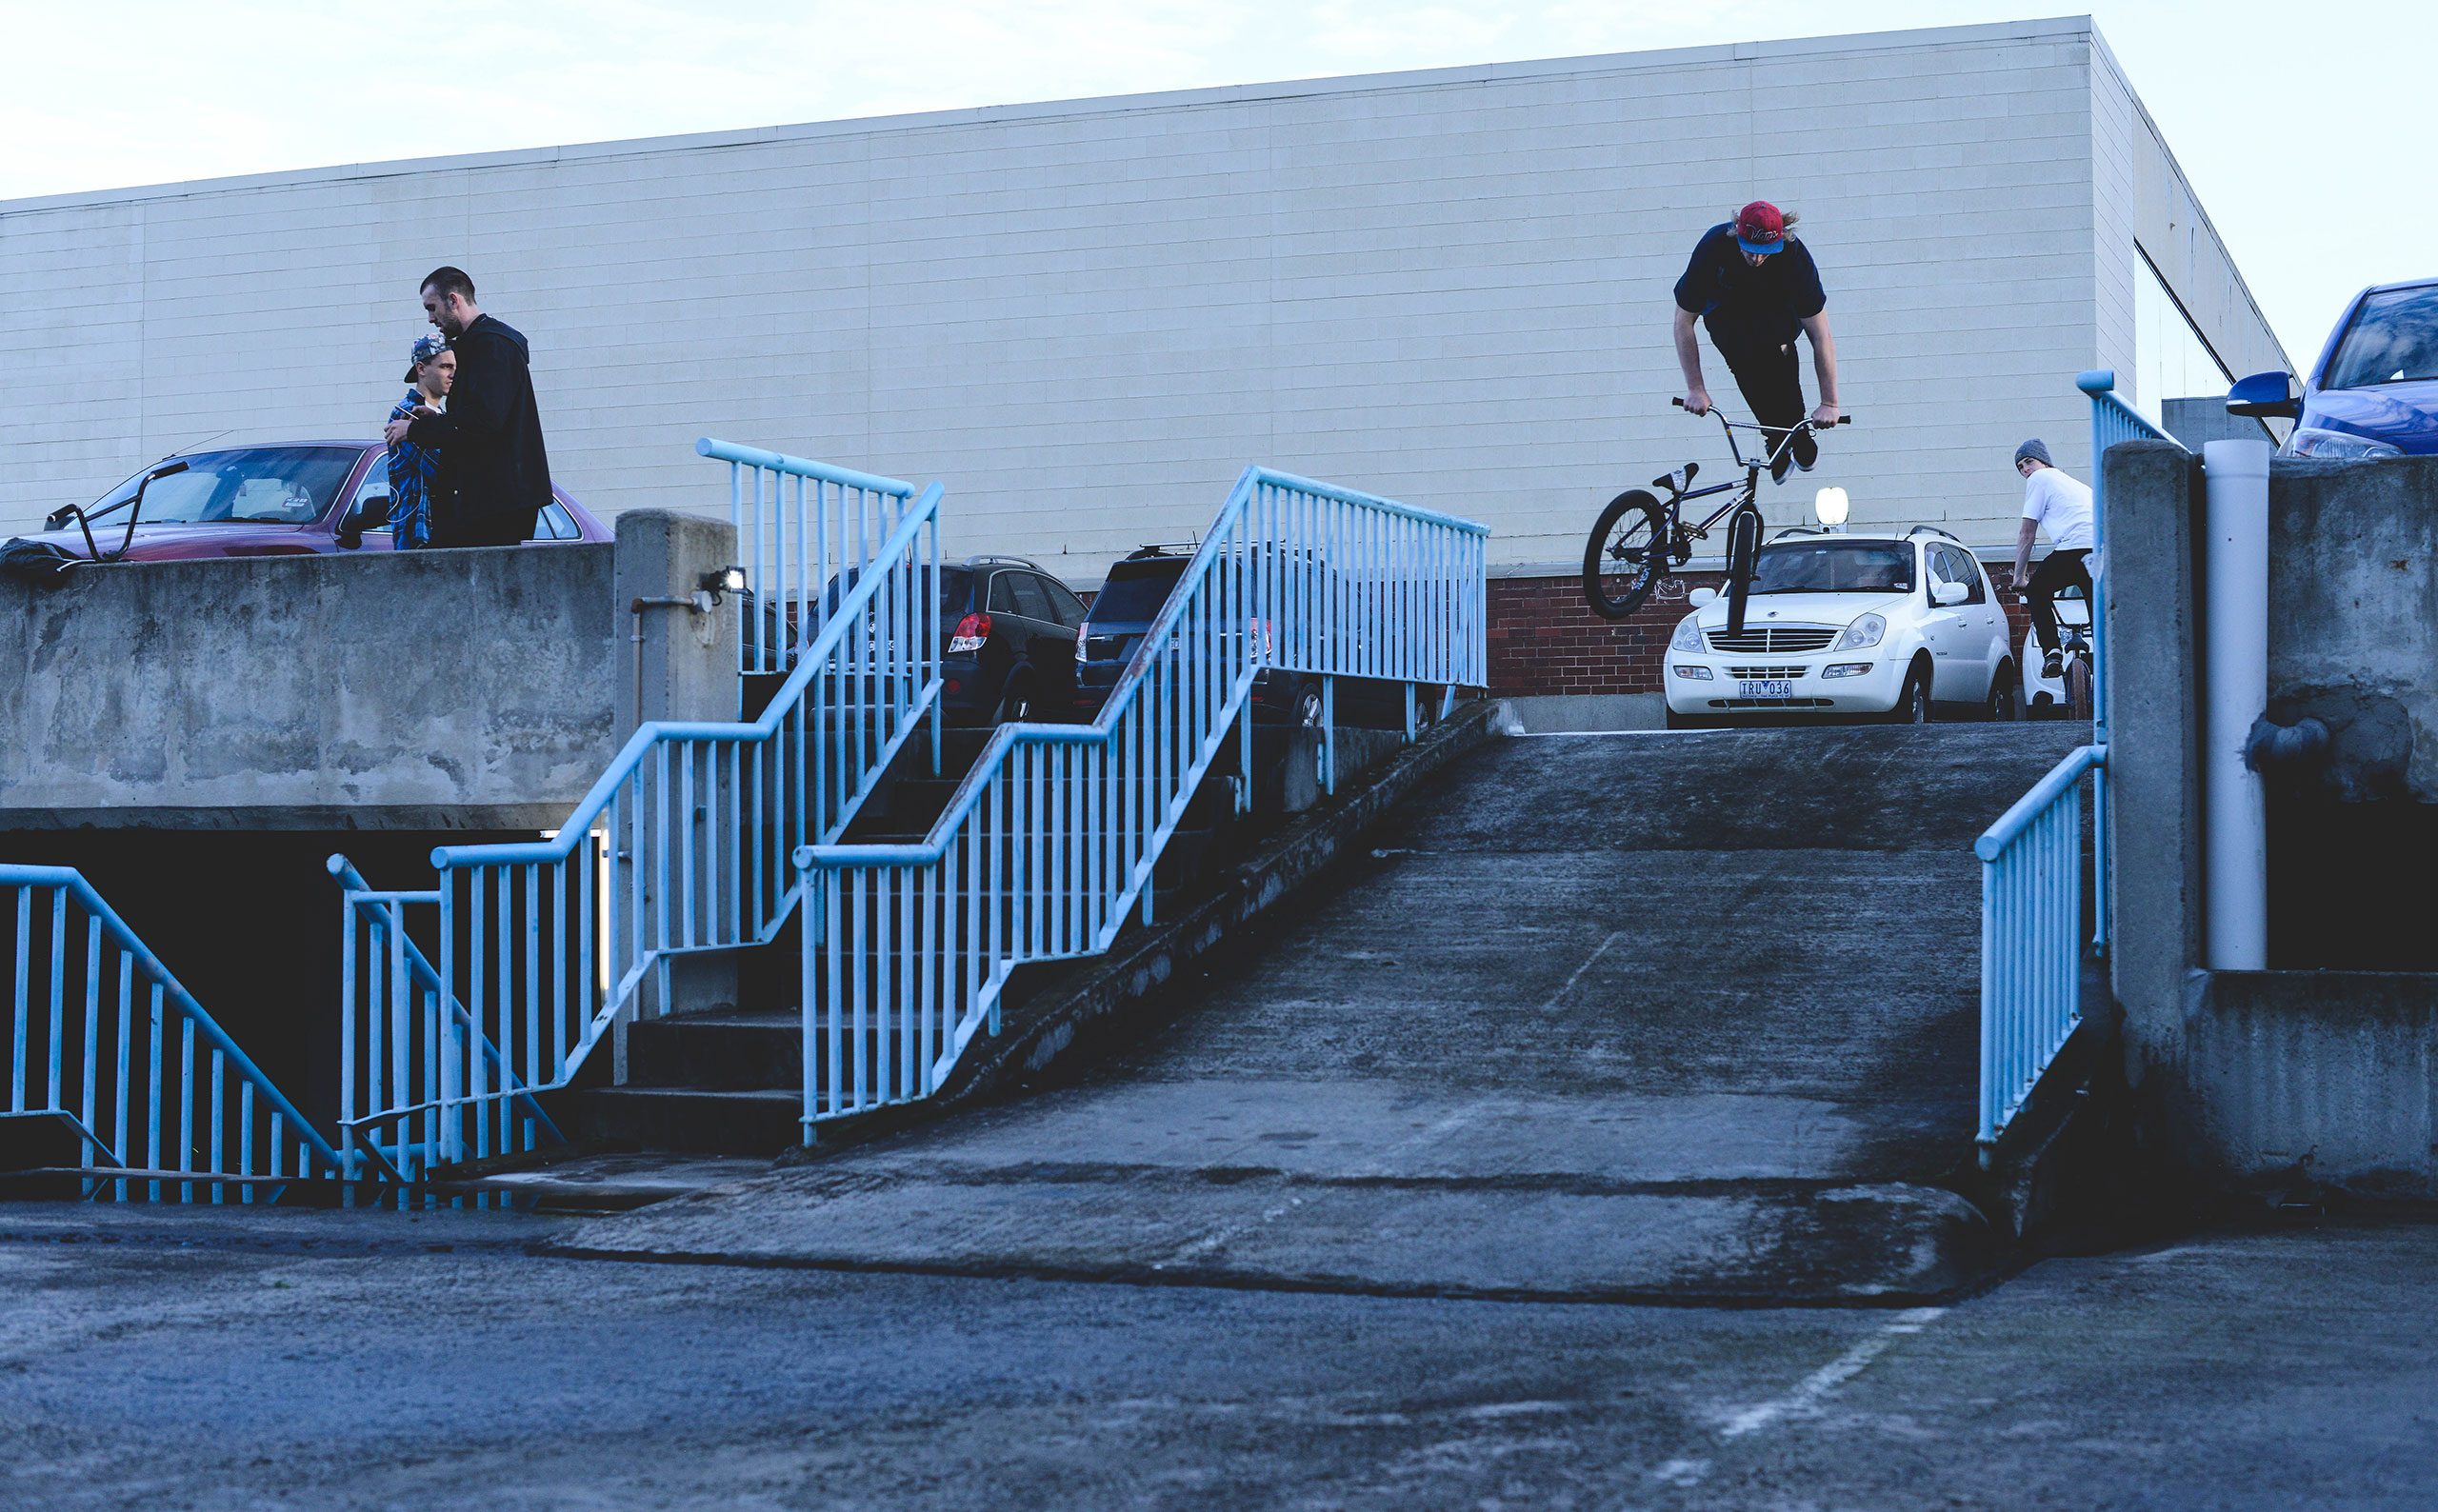 Brad Anderson steezy whip into a carpark driveway.